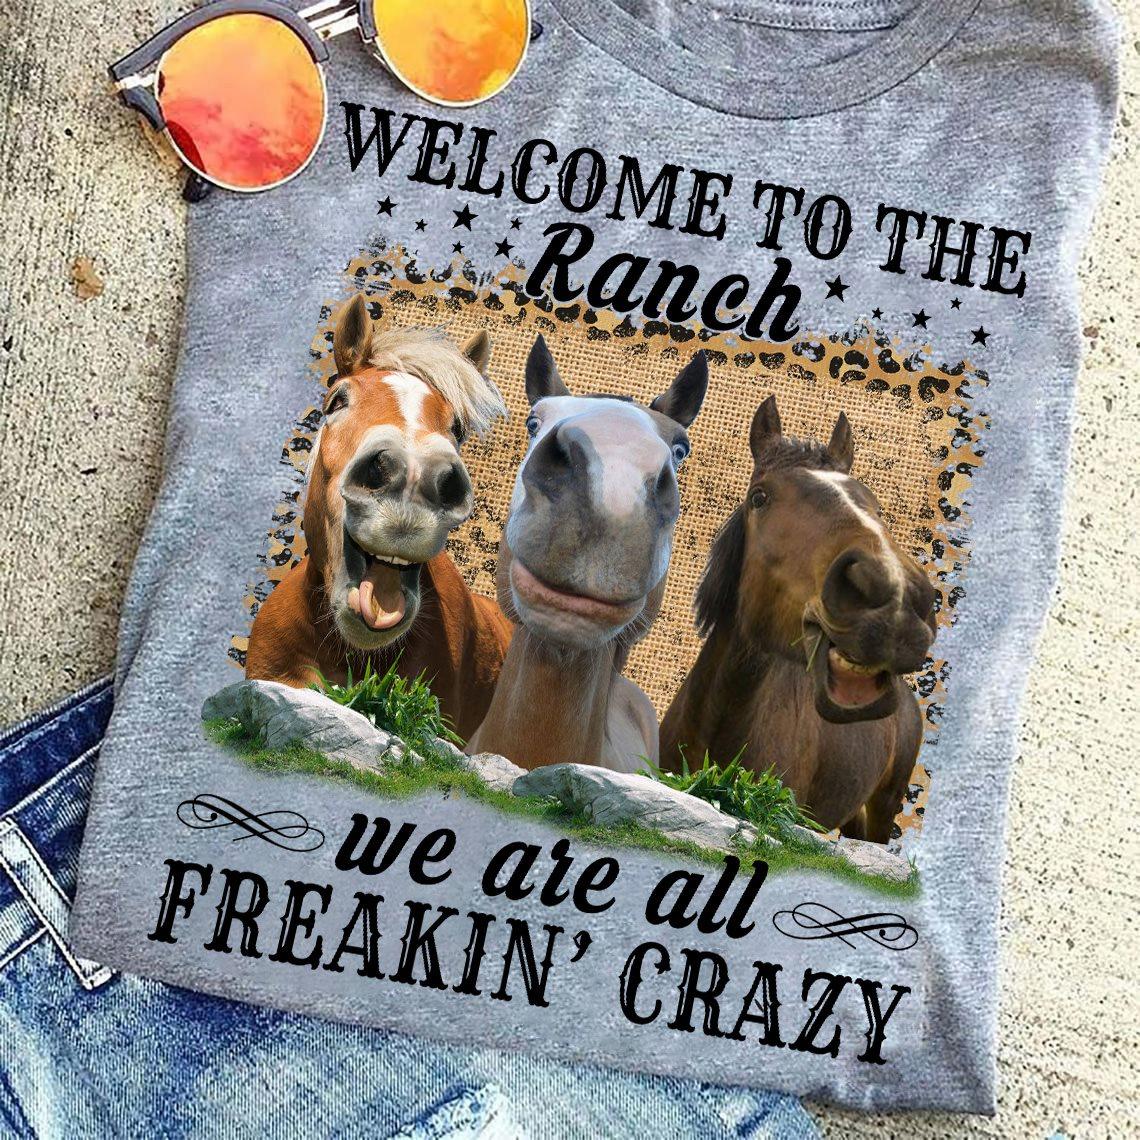 Welcome to the ranch we are all freakin crazy - Funny horse graphic T-shirt, horse ranch